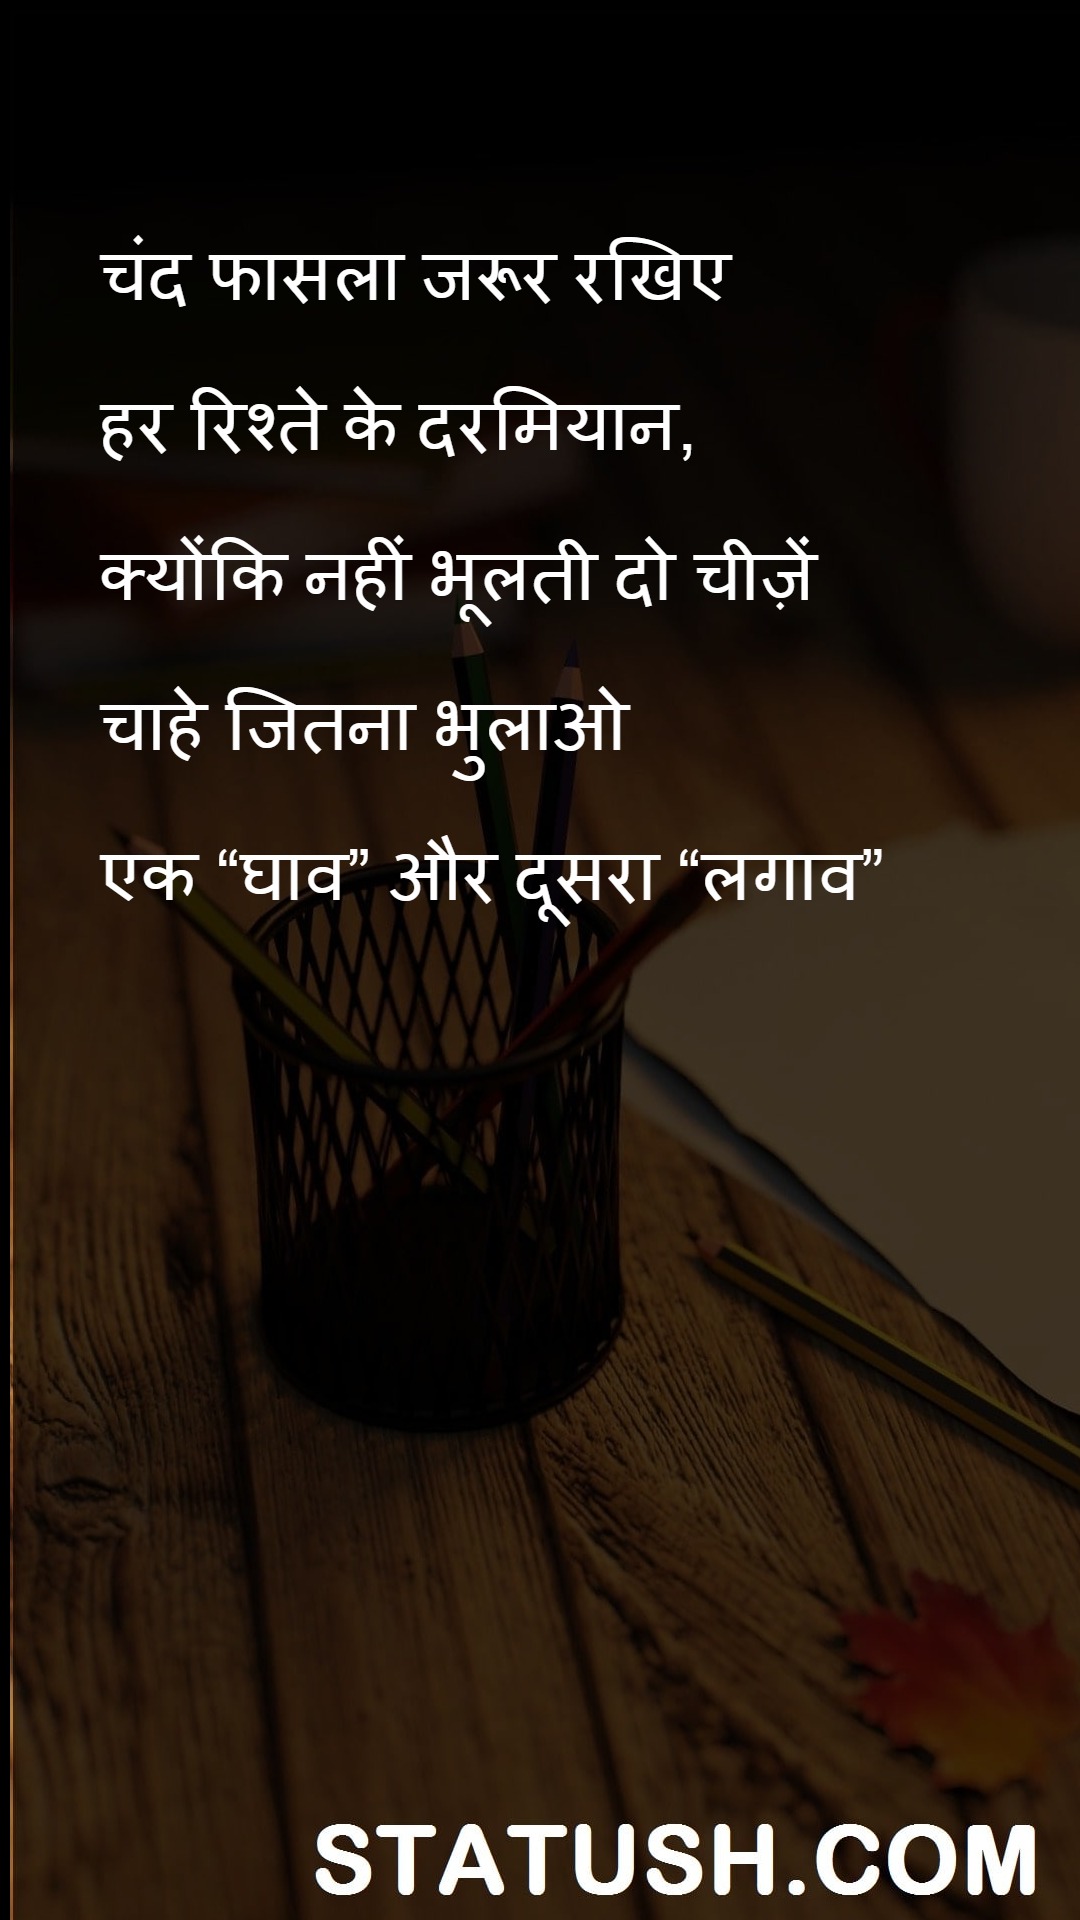 Be sure to keep a few distance between Hindi Quotes at statush.com